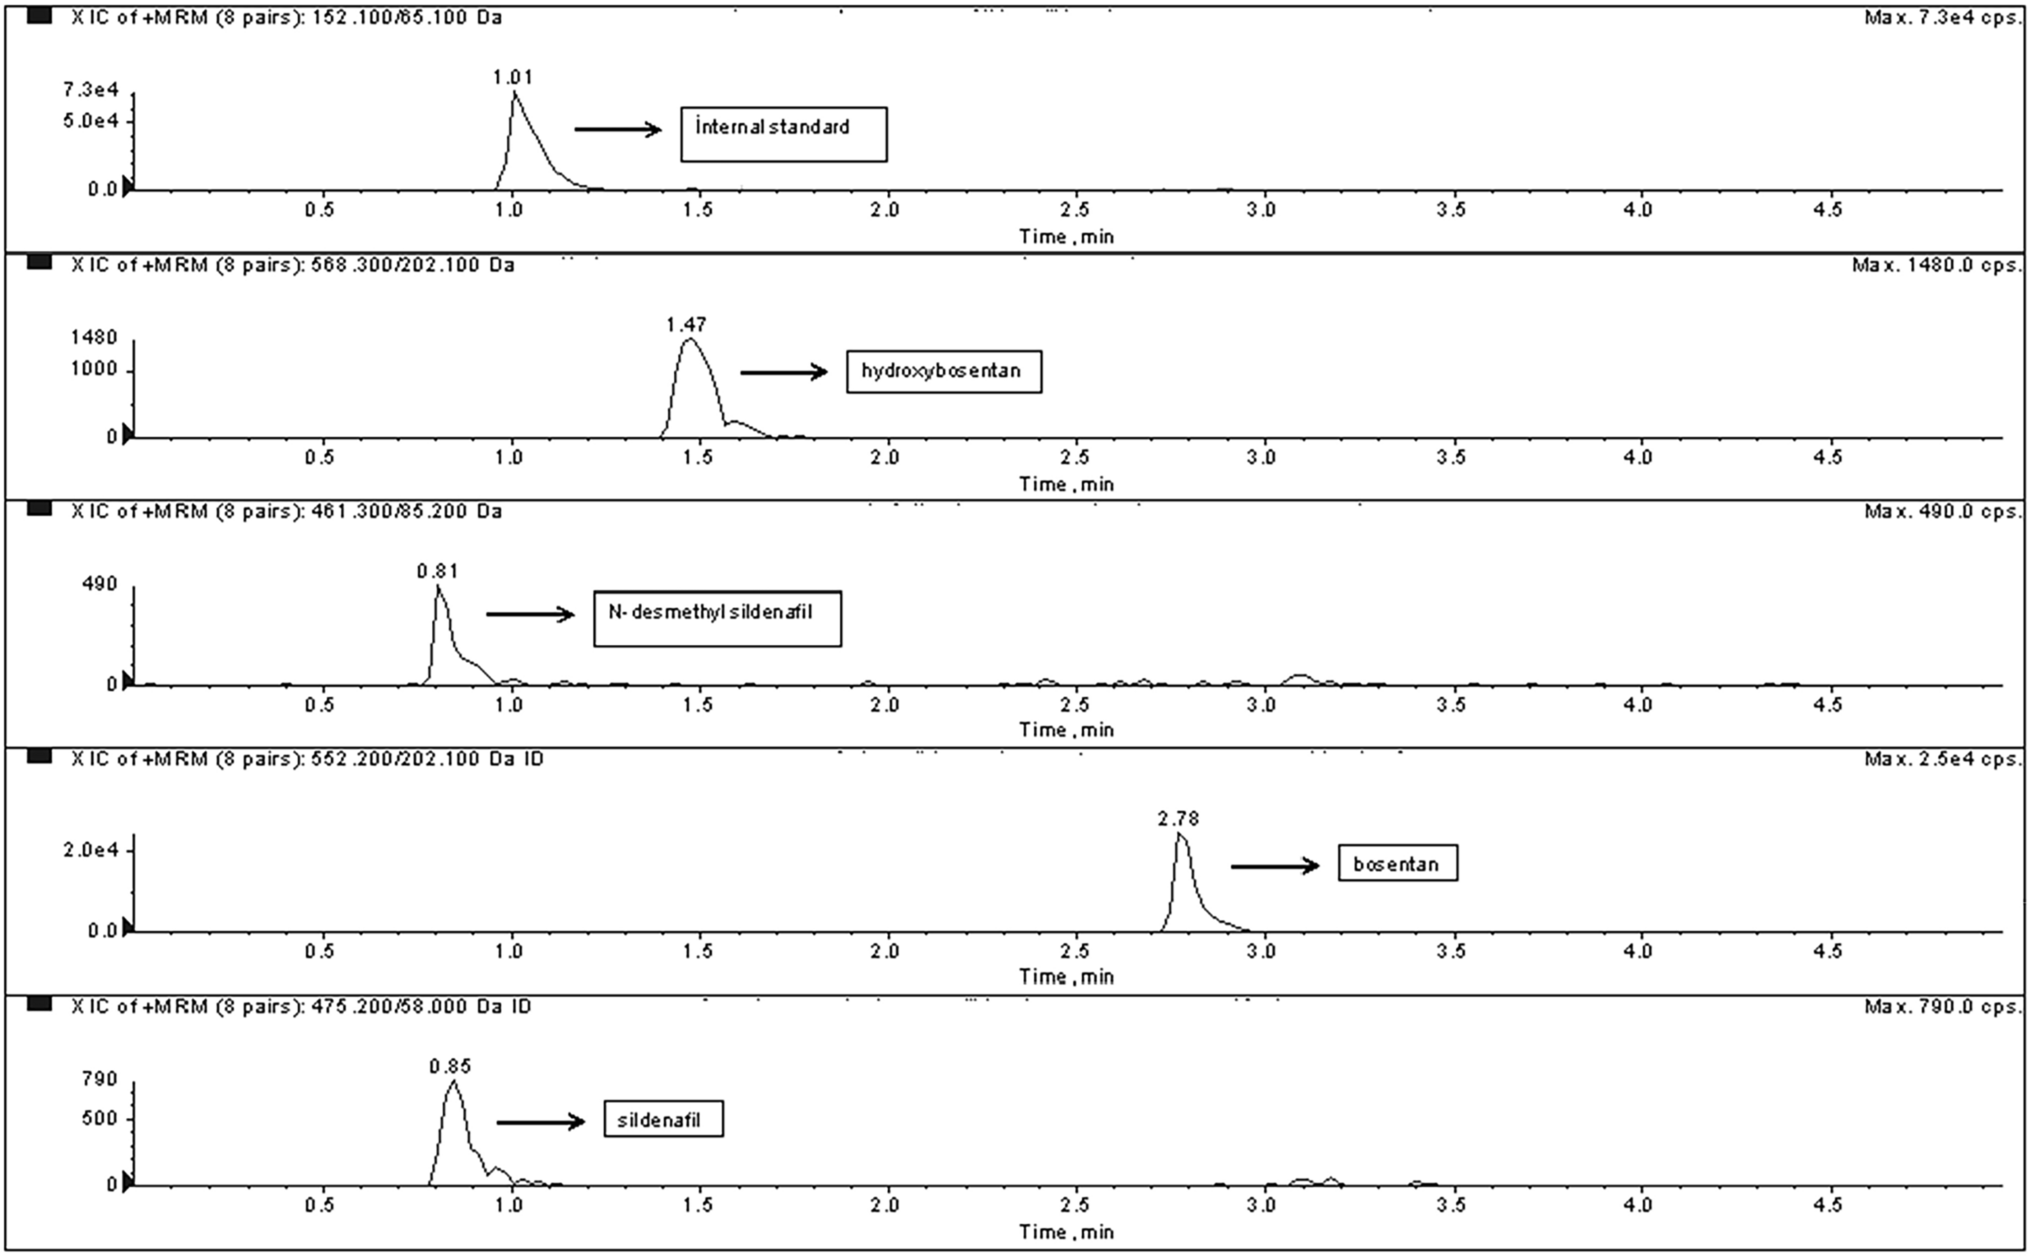 Development of a Robust, Rapid and Reliable Tandem Mass Spectrometry Method for the Measurement of Sildenafil, Bosentan and their Major Metabolites